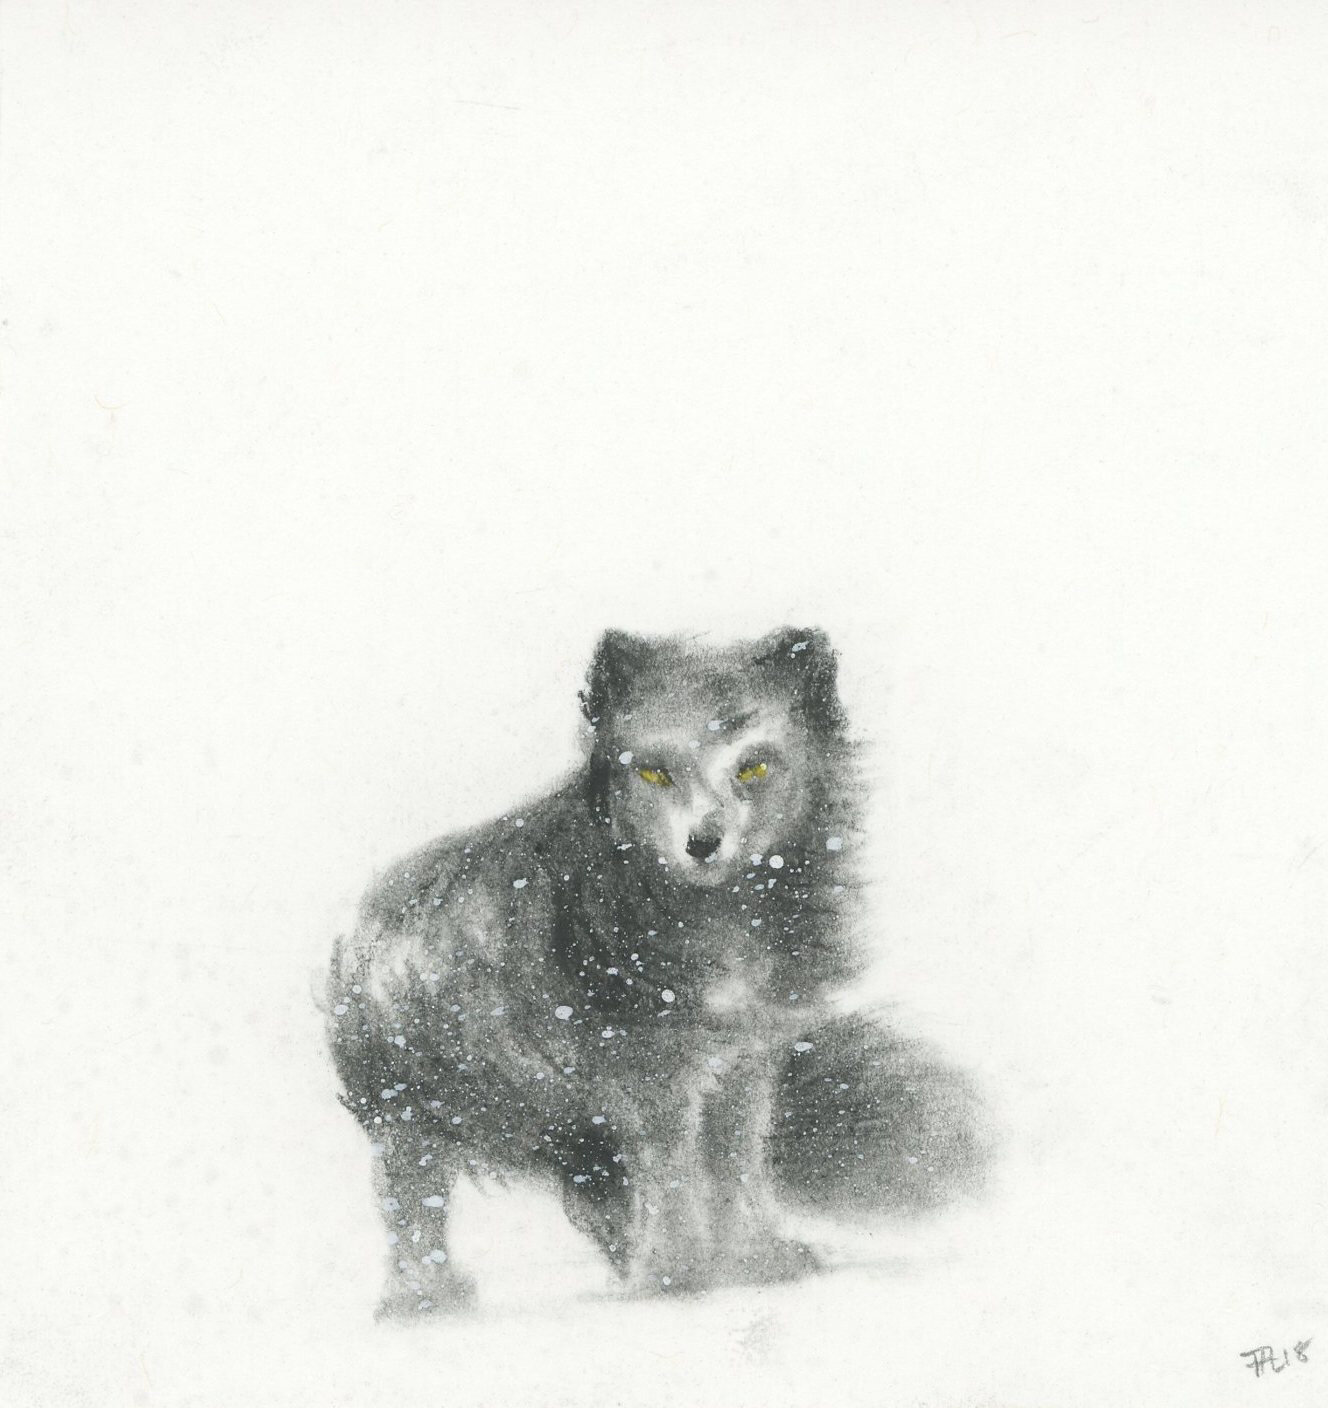  Summer phase Arctic fox in late snow. Iceland. Charcoal and gouache. 